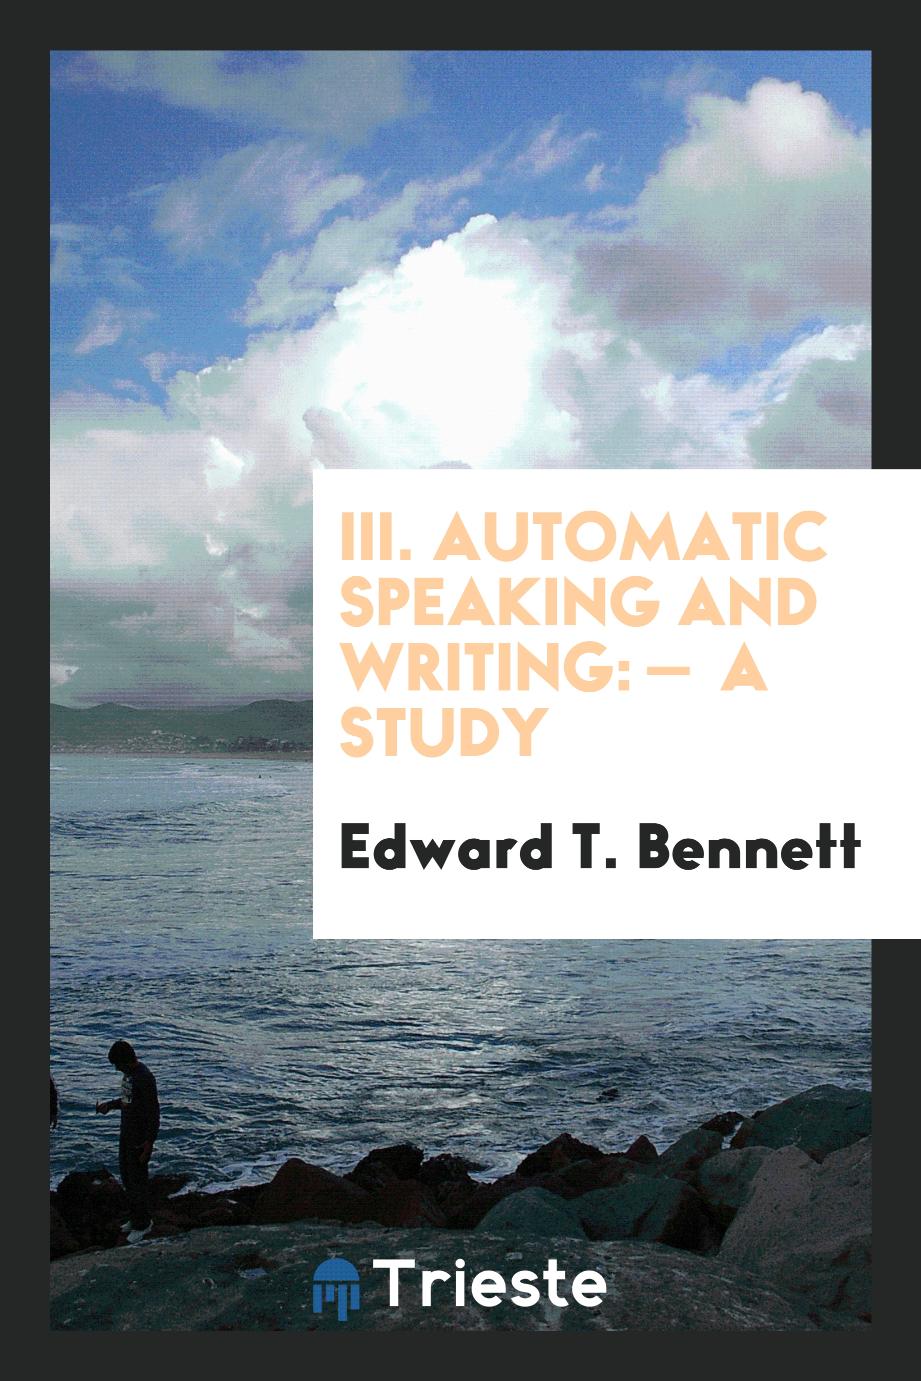 III. Automatic Speaking and Writing: — A Study